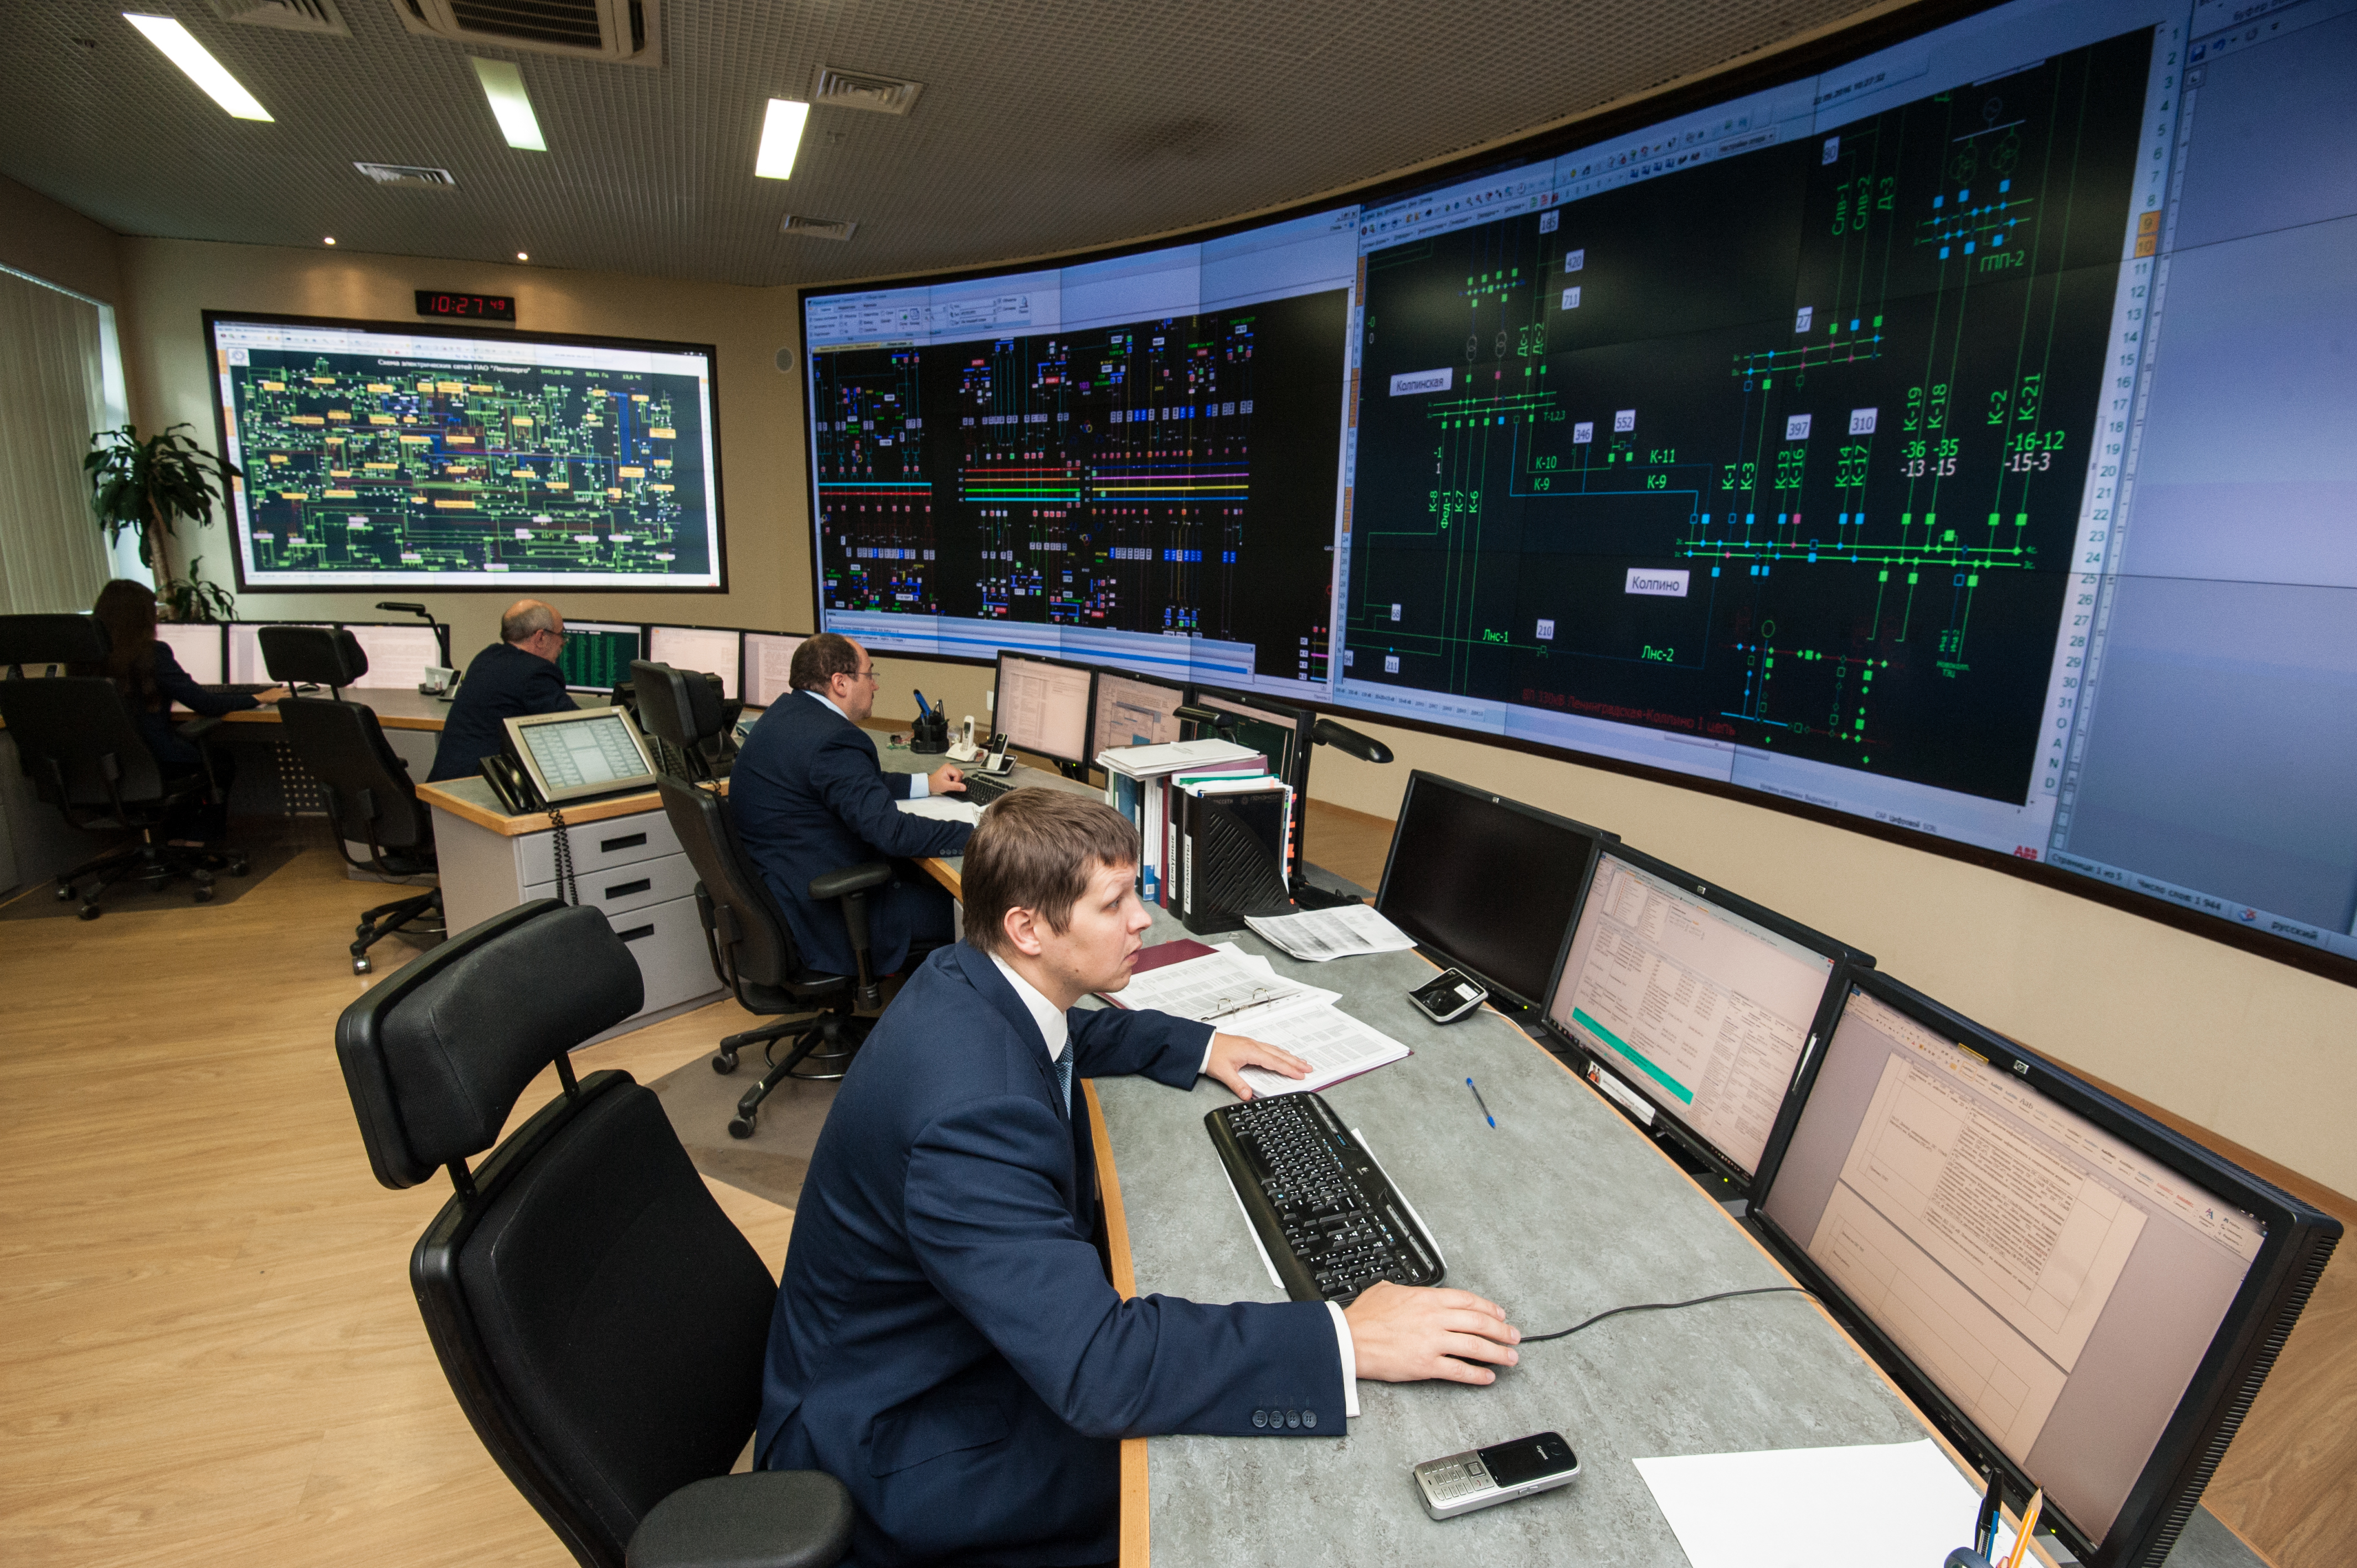 Employees working in a control room at workstations with video walls displaying IT infrastructure data